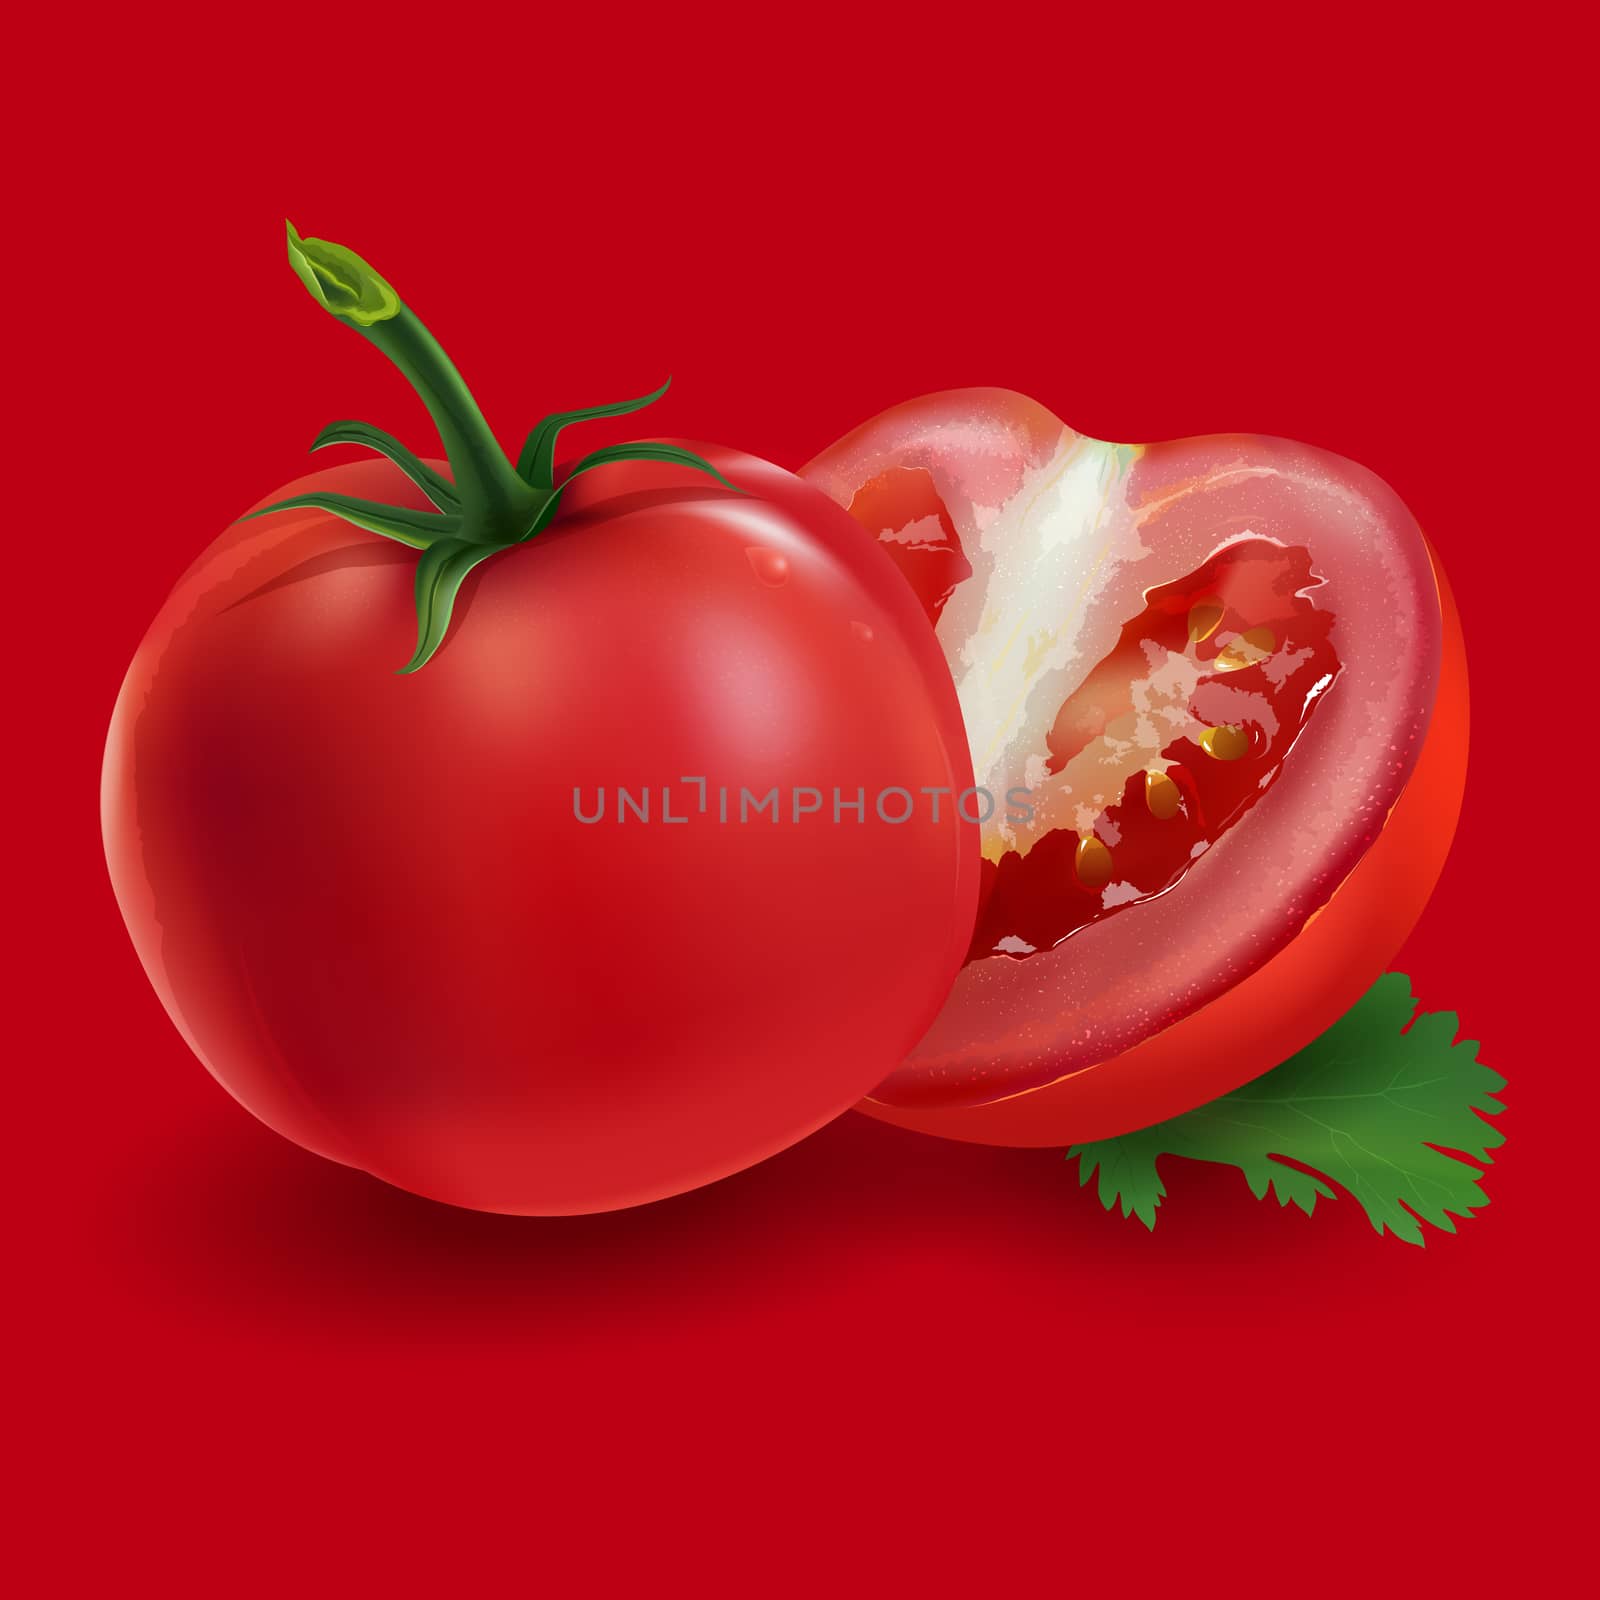 Realistic fresh tomatoes on a red background.